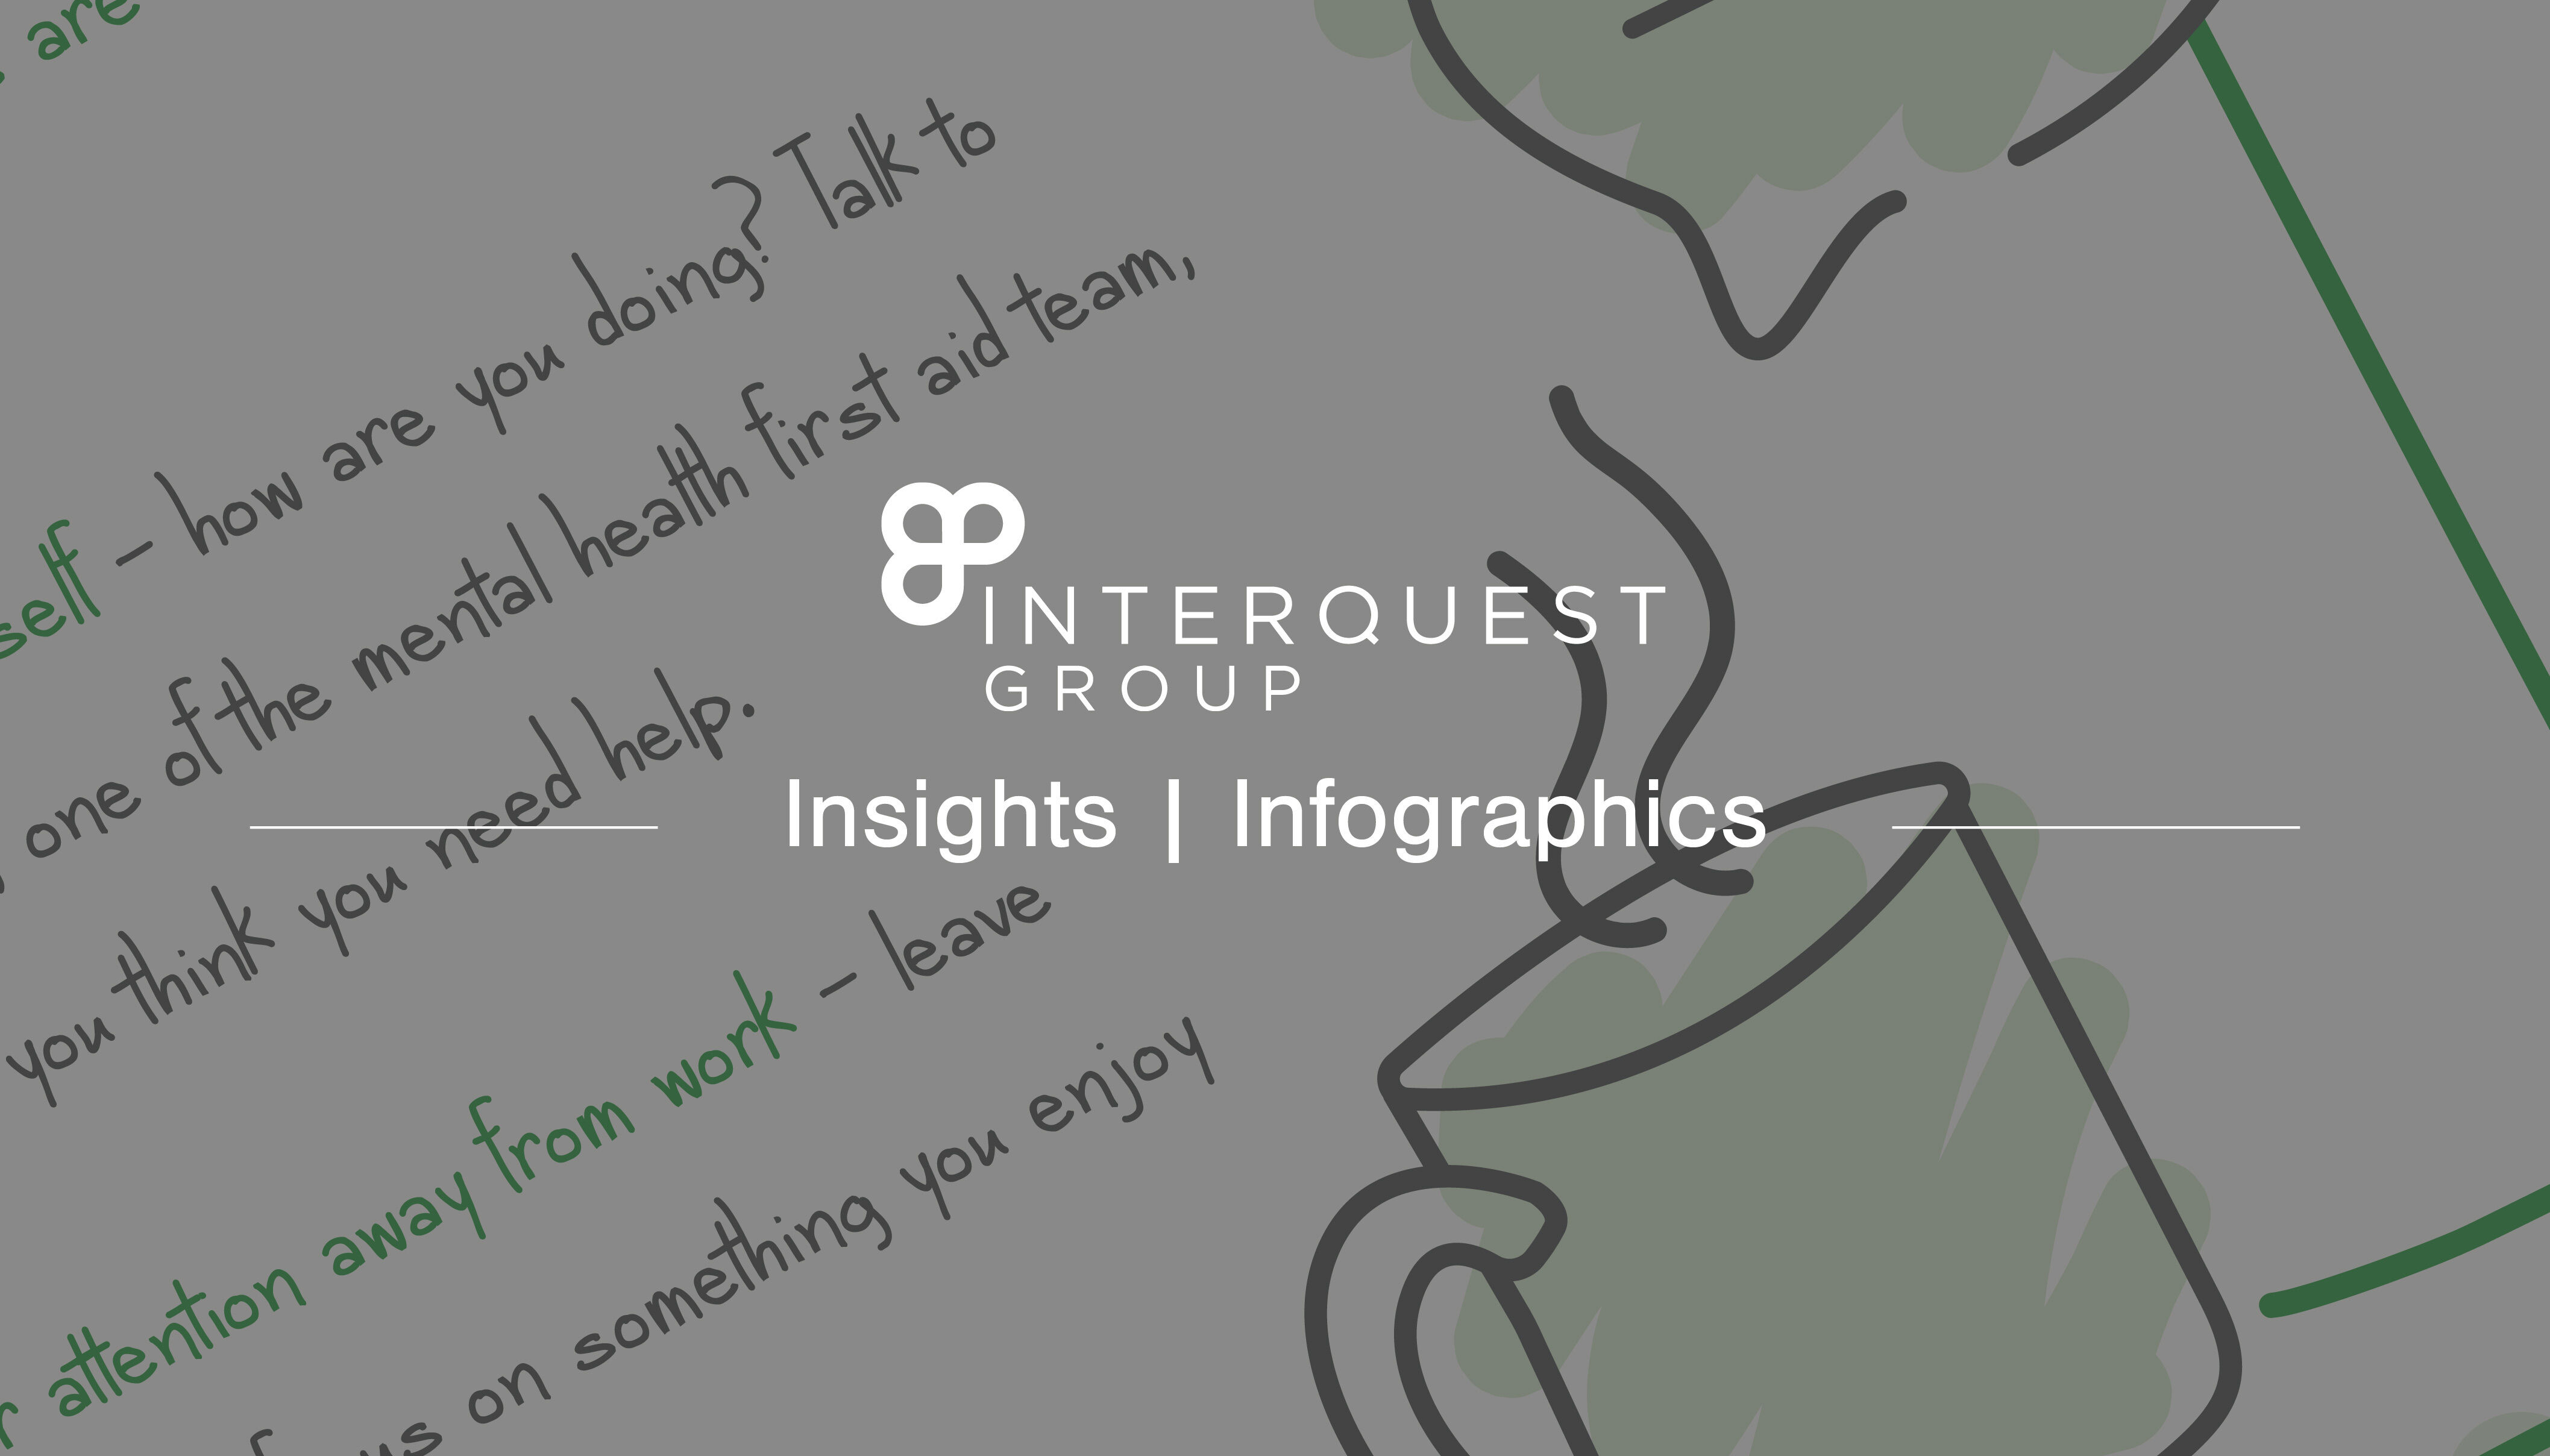 InterQuest Group insights infographics banner for Stress Awareness Day